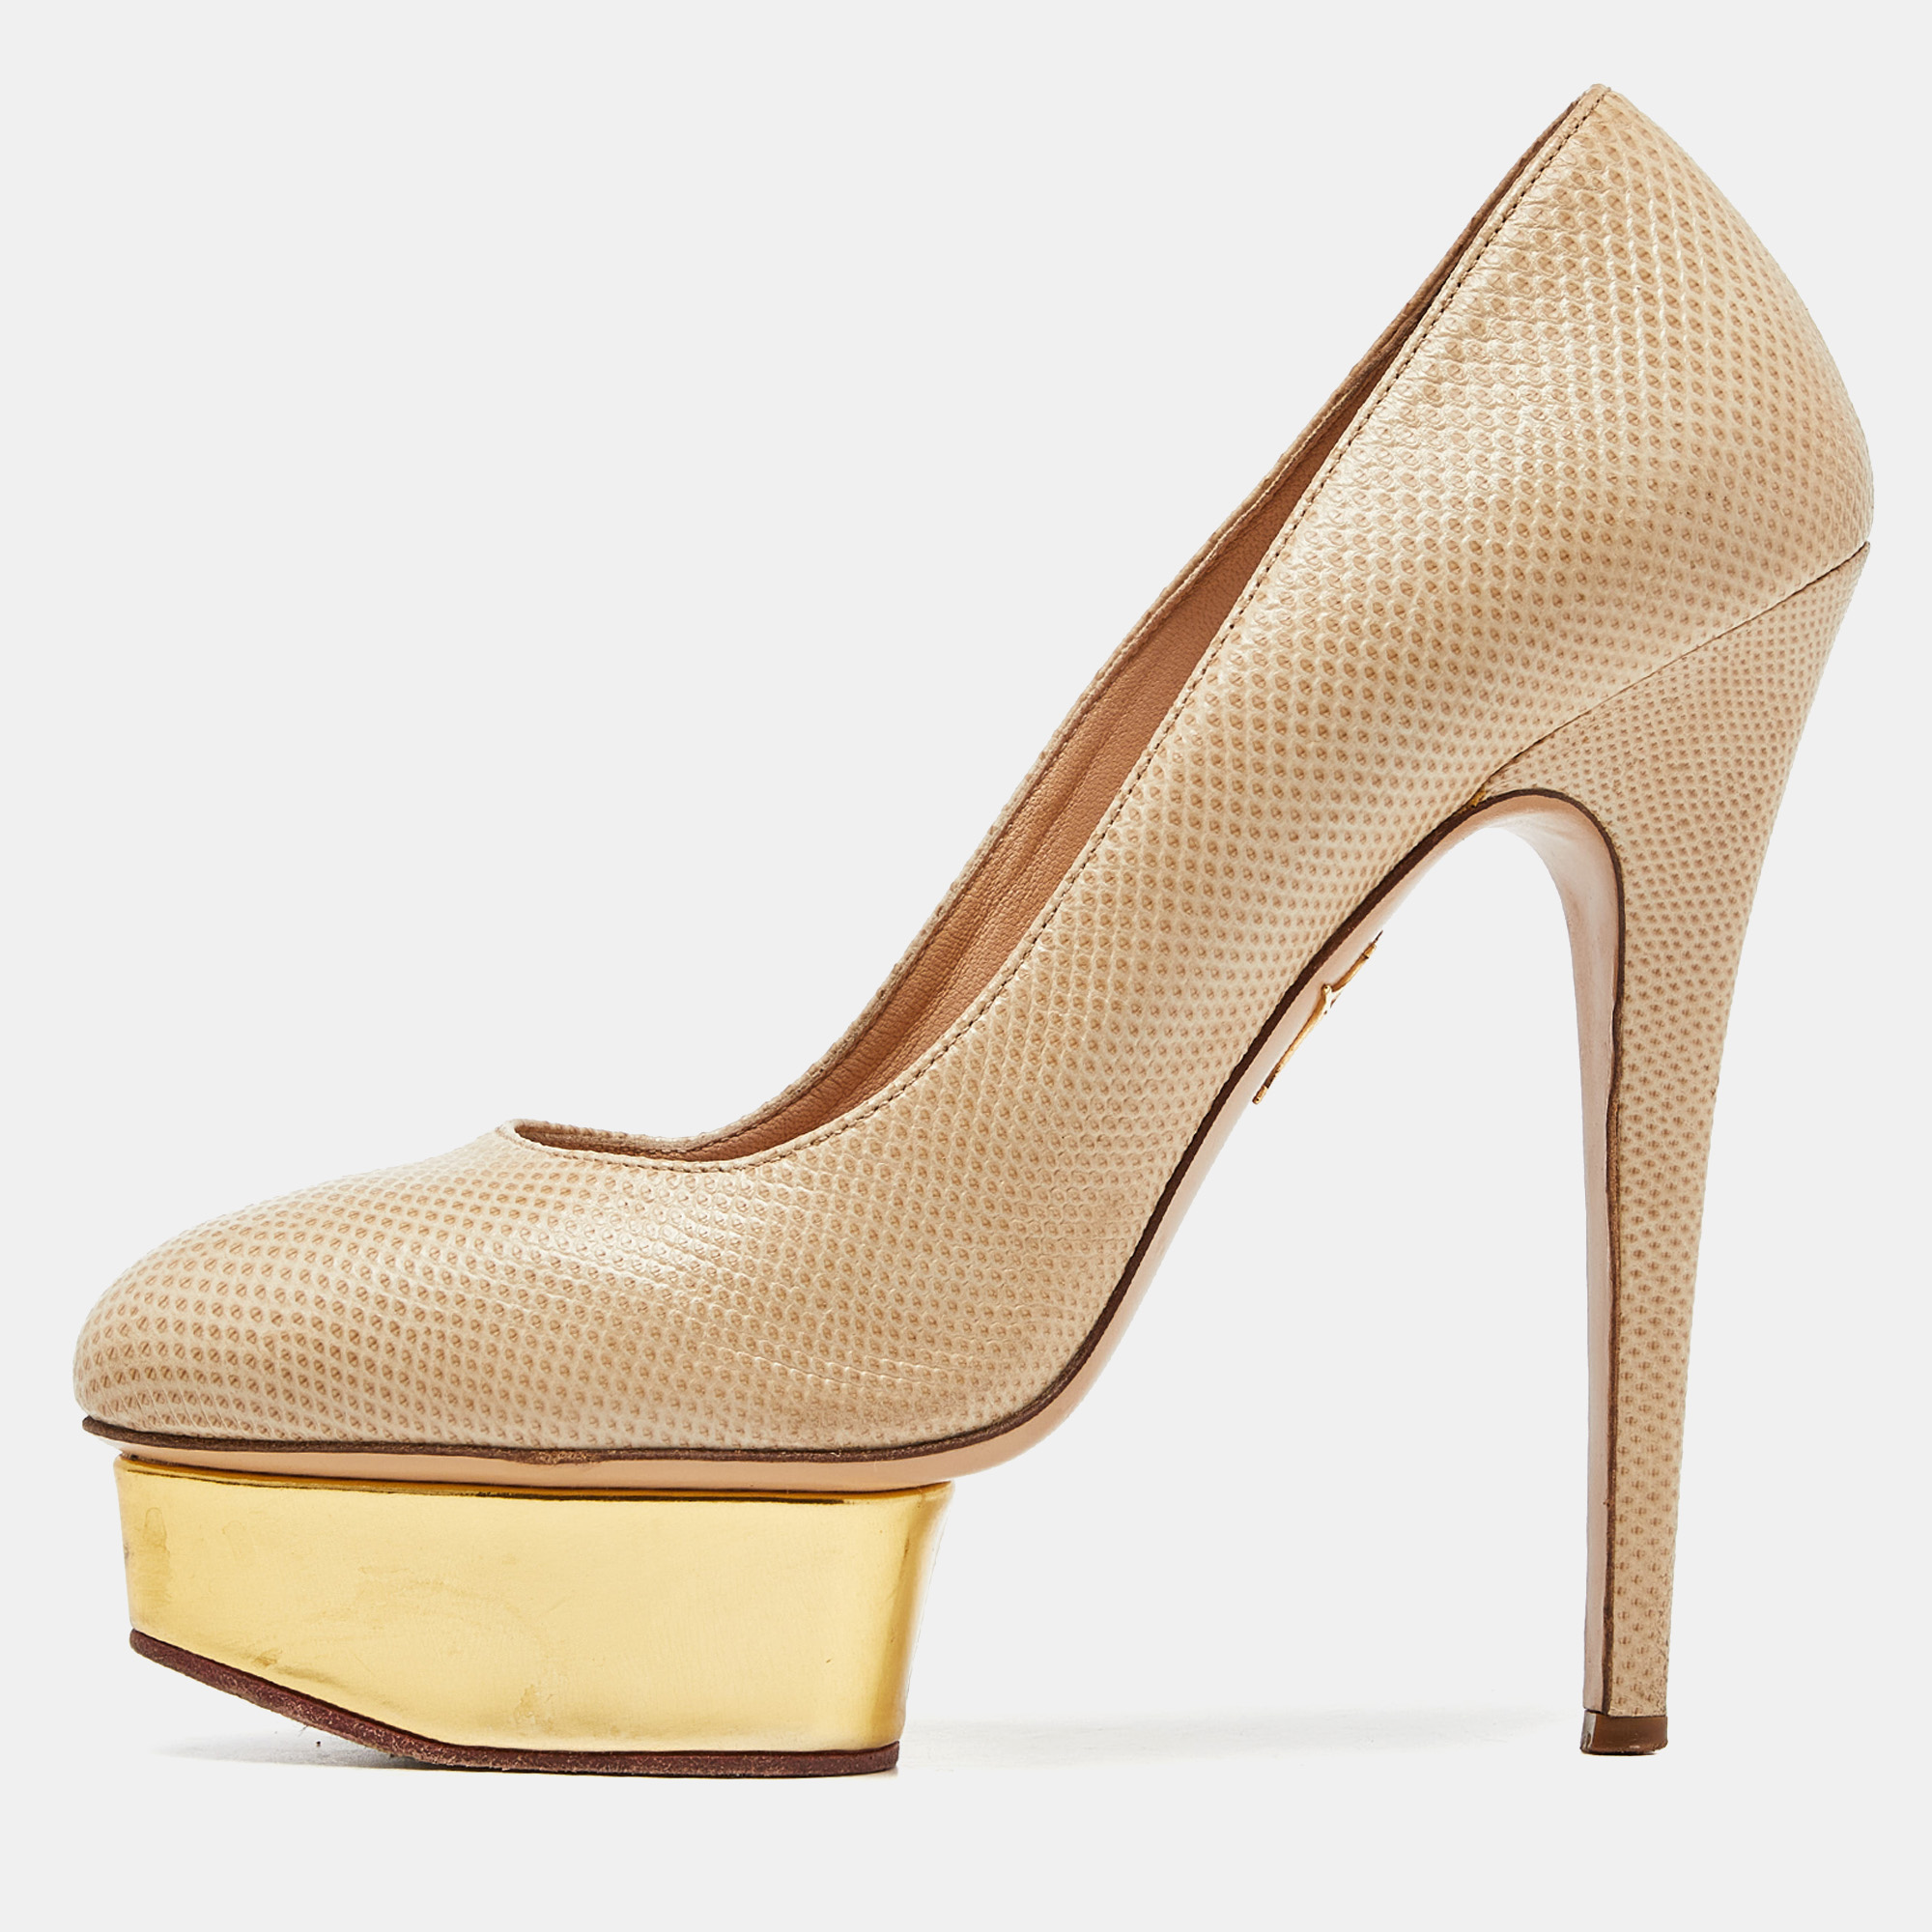 Charlotte olympia beige/gold karung leather dolly platform pumps size 39